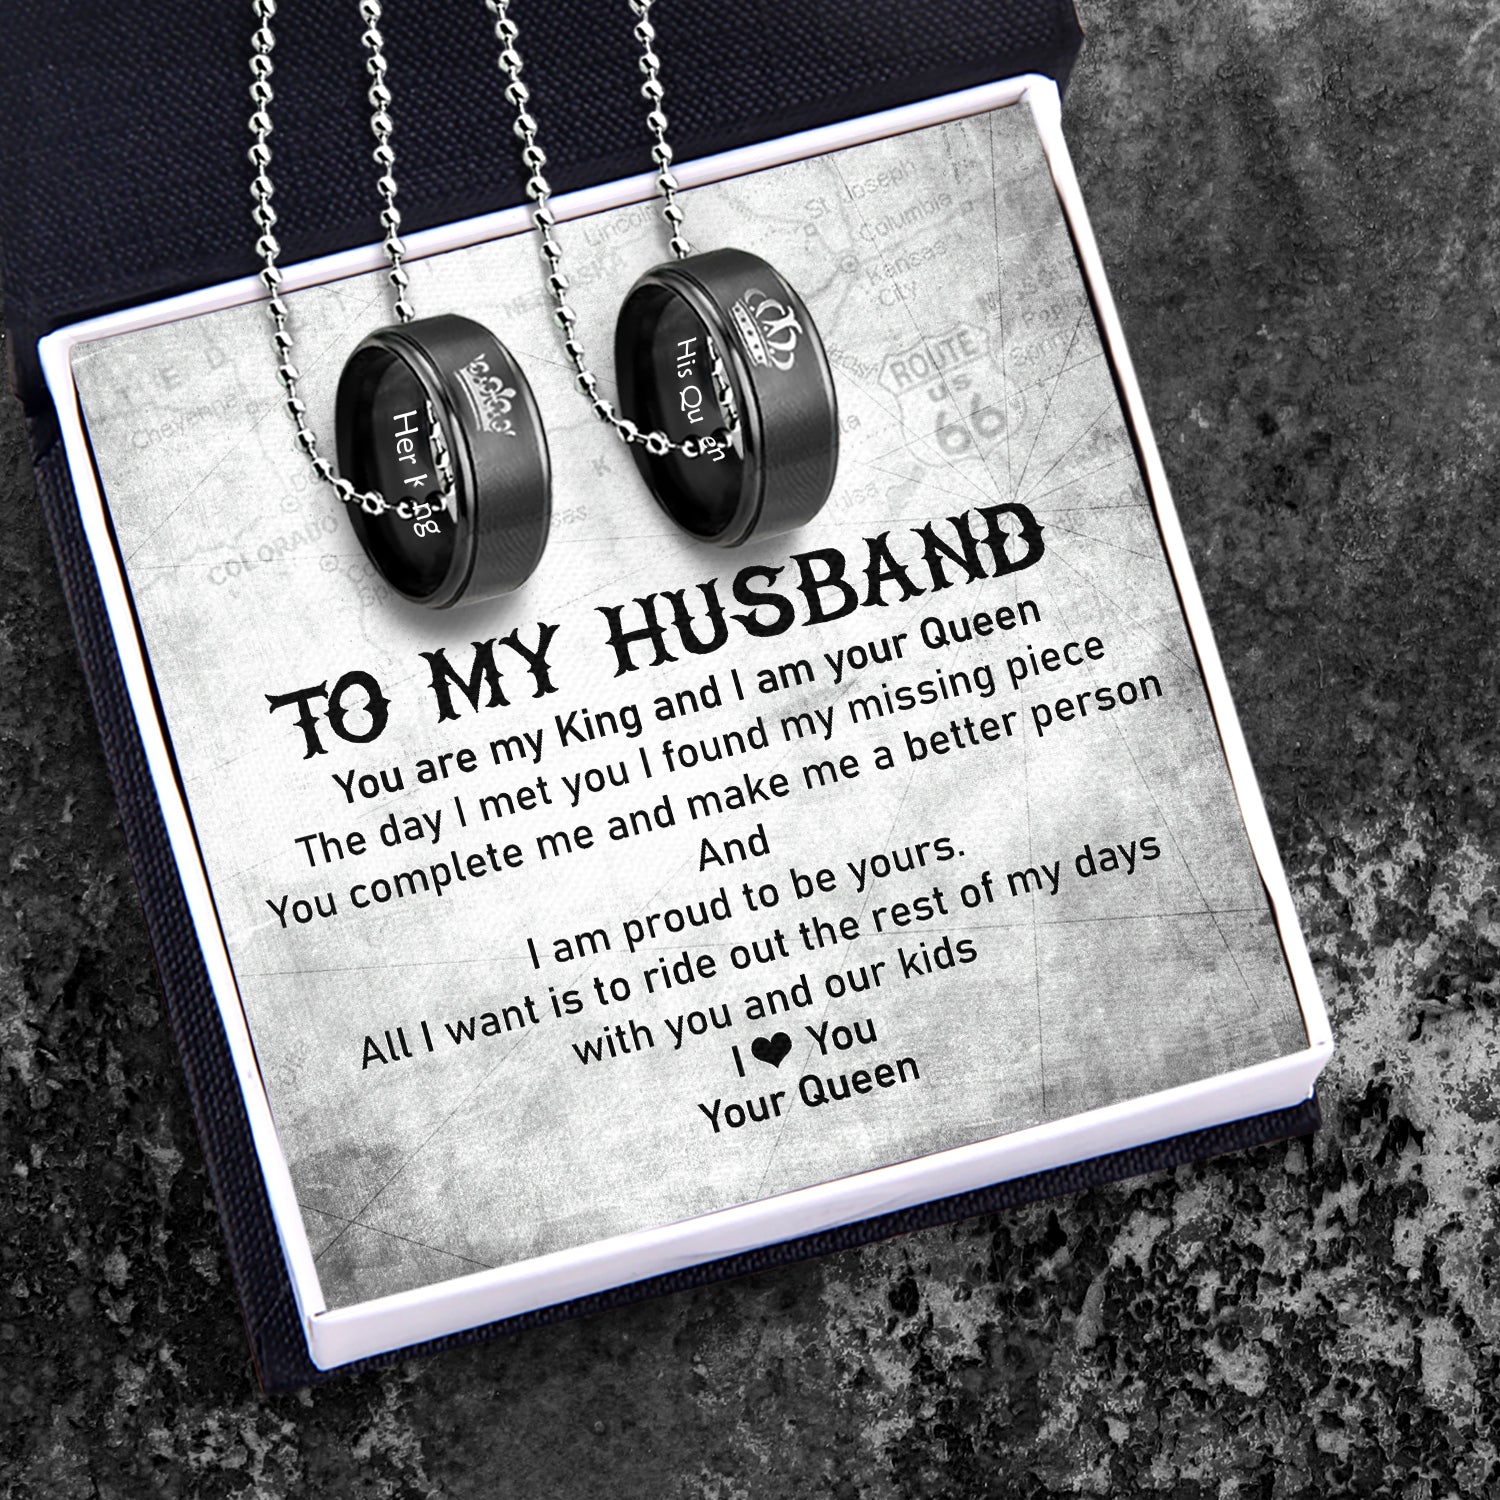 Couple Pendant Necklaces - Biker - To My Husband - I Am Proud To Be Yours - Ukgnw14002